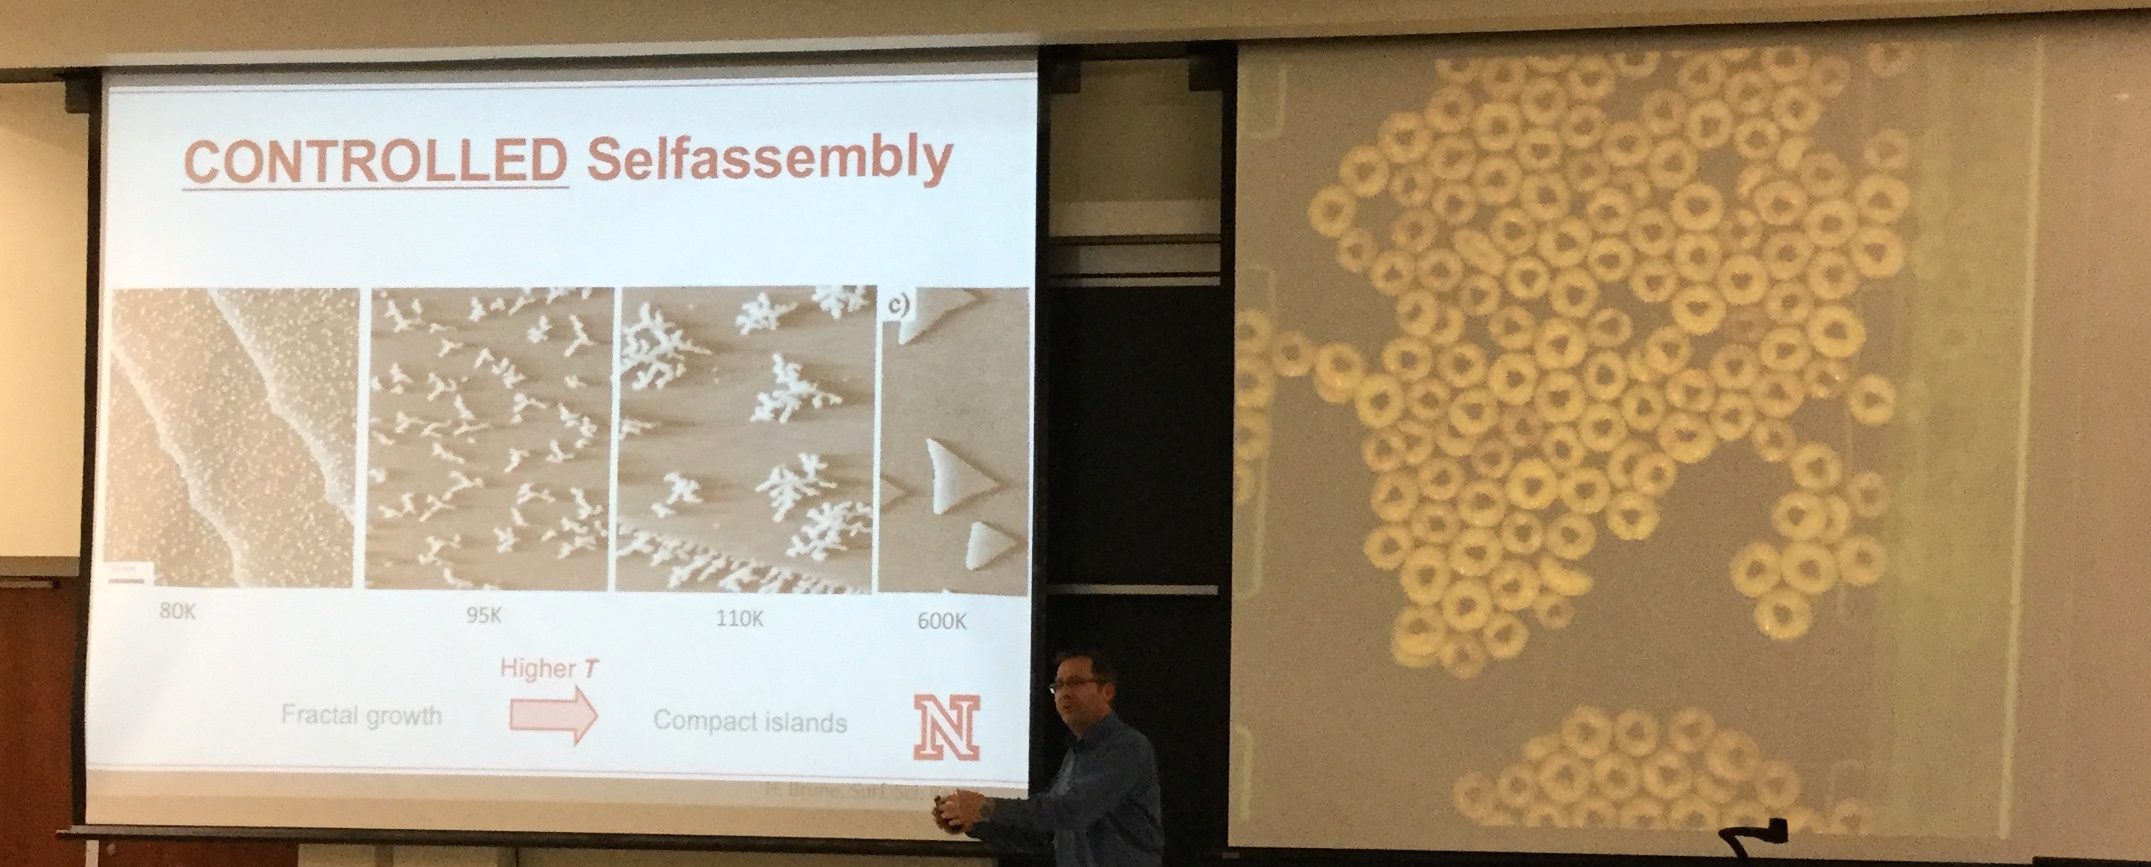 Dr. Enders demonstrates self-assembly in Cheerios (right) while presenting scanning tunneling microscopy (STM) images showing the self-assembly of silver atoms on a platinum substrate at various temperatures (left). (Click to enlarge.)